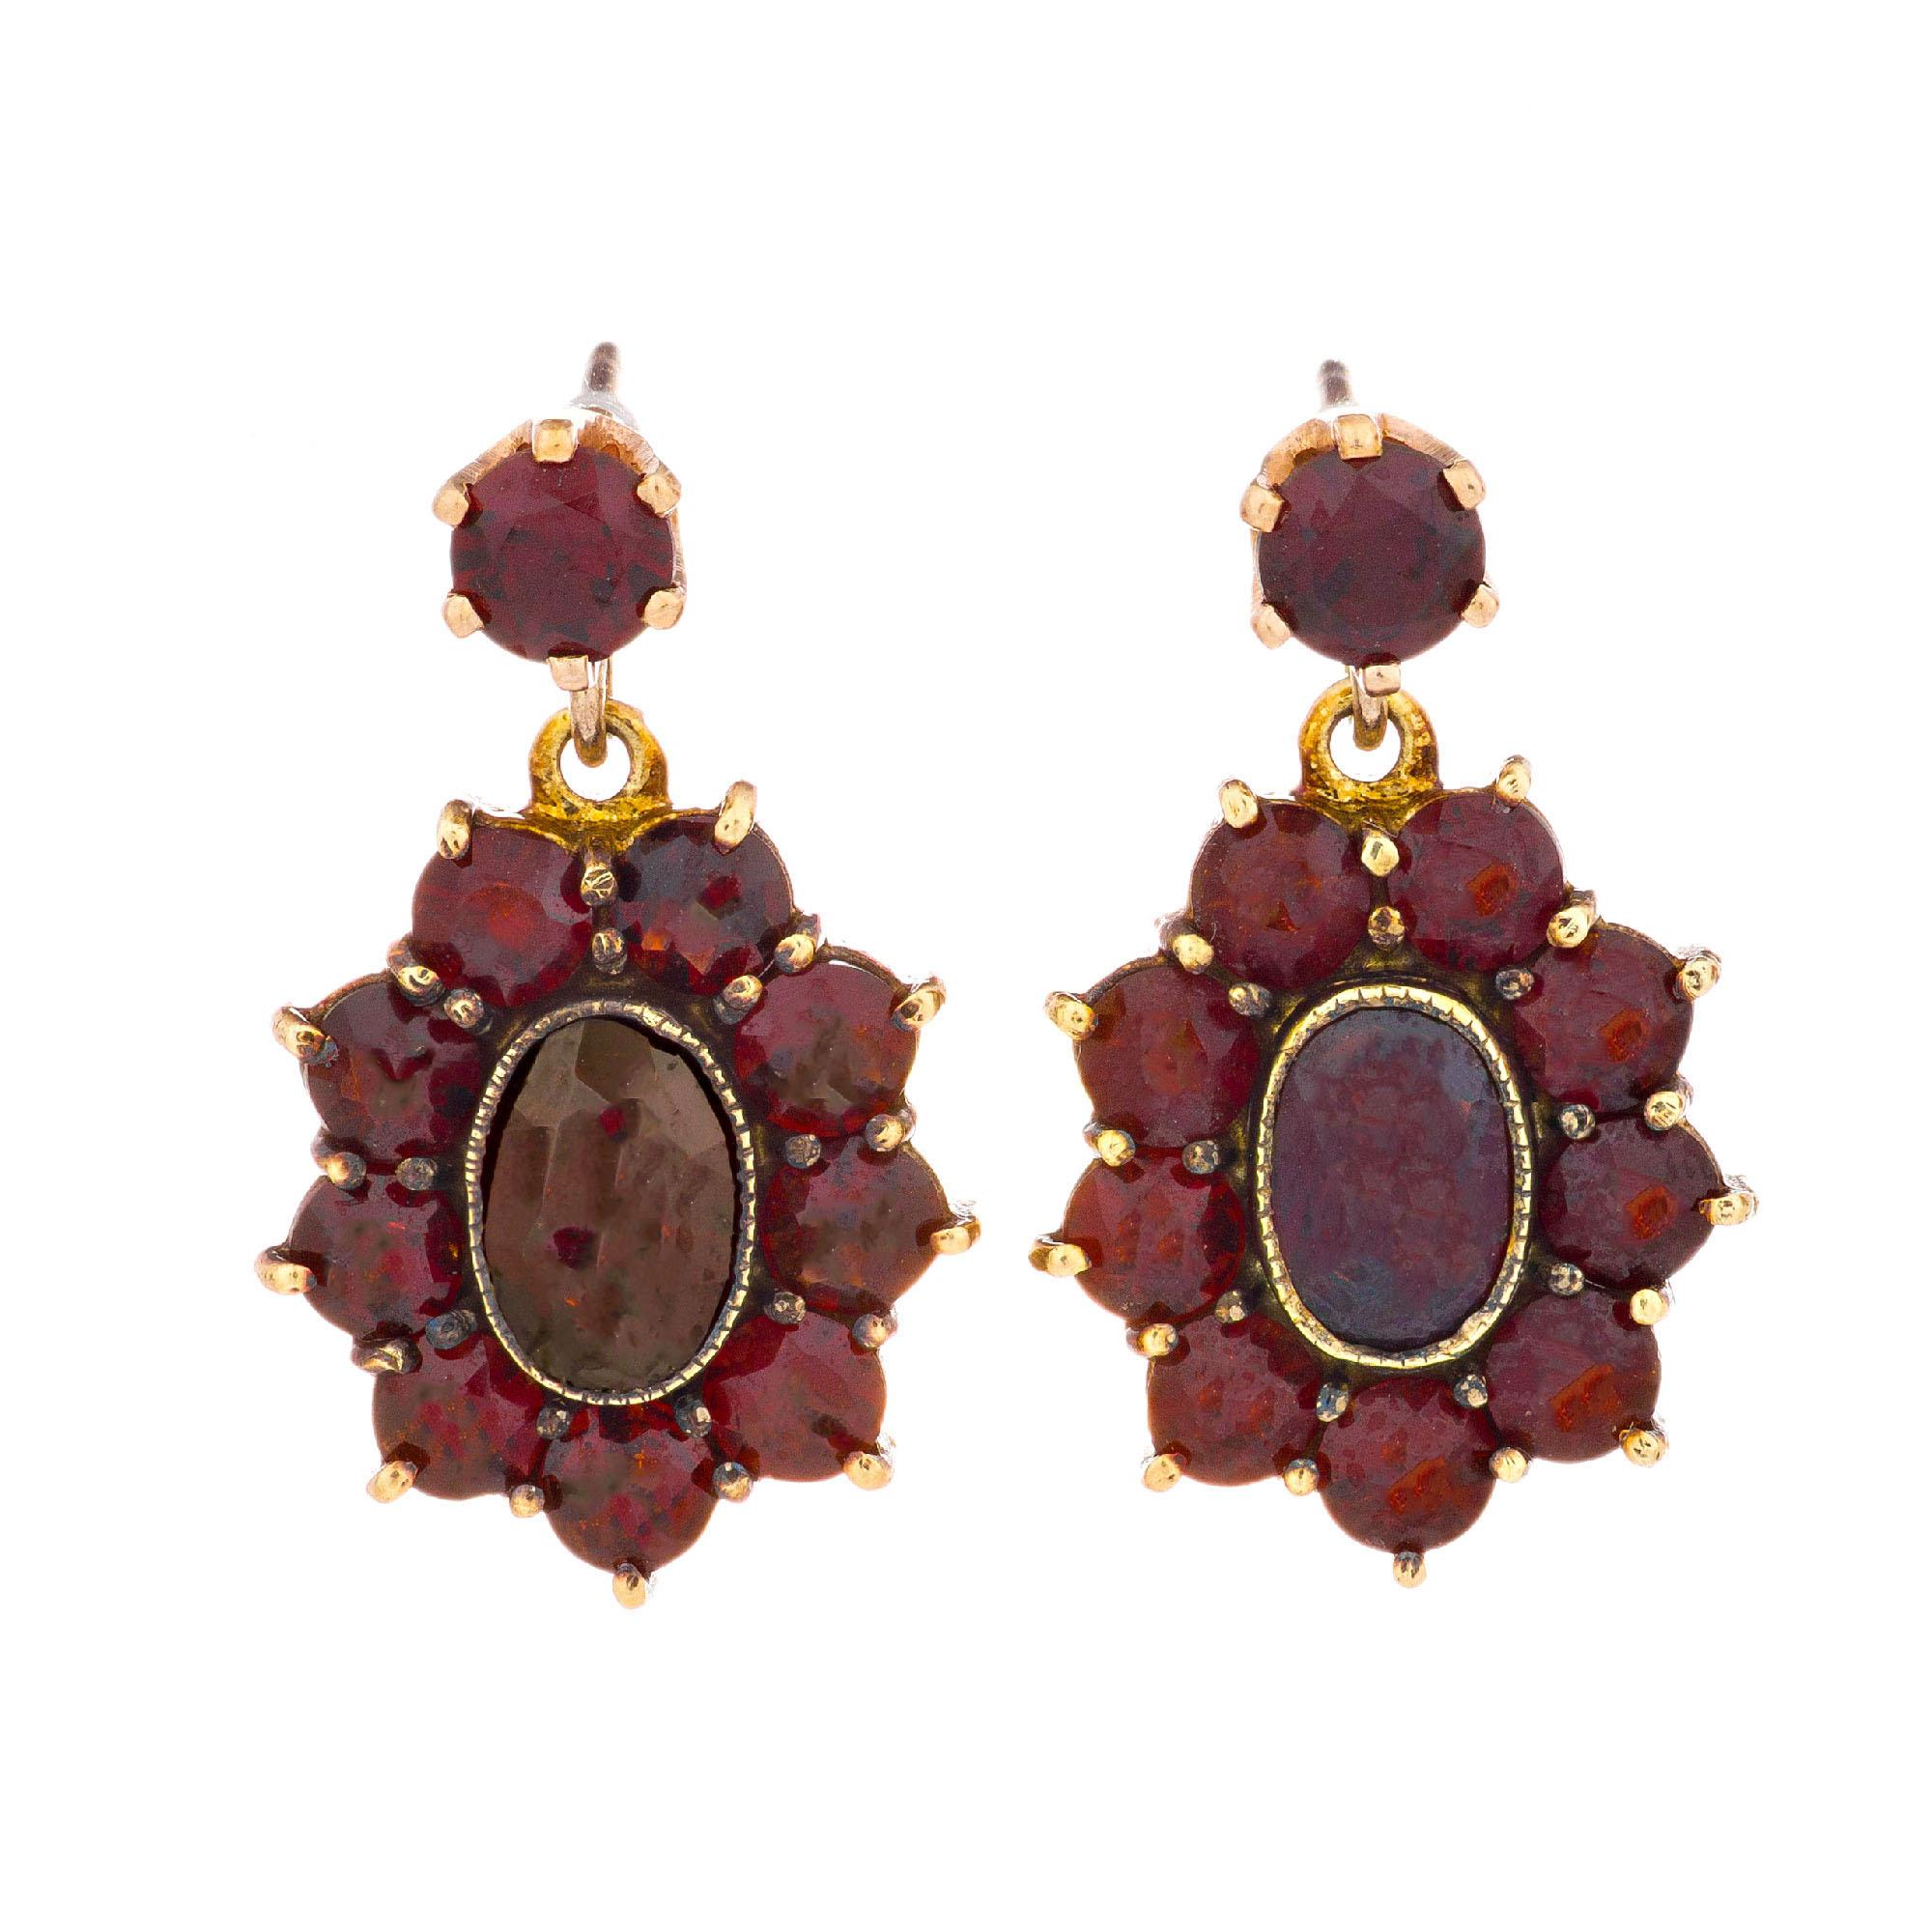 Mid-Century 1950's German garnet dangle cluster earrings. Set in 14k yellow gold with two oval center stones 1.10 cts total and 20 accent garnets. 

2 oval reddish-brown garnets 1.10cts
2 round garnets .50 cts
18 round garnets  1.44cts
14k yellow